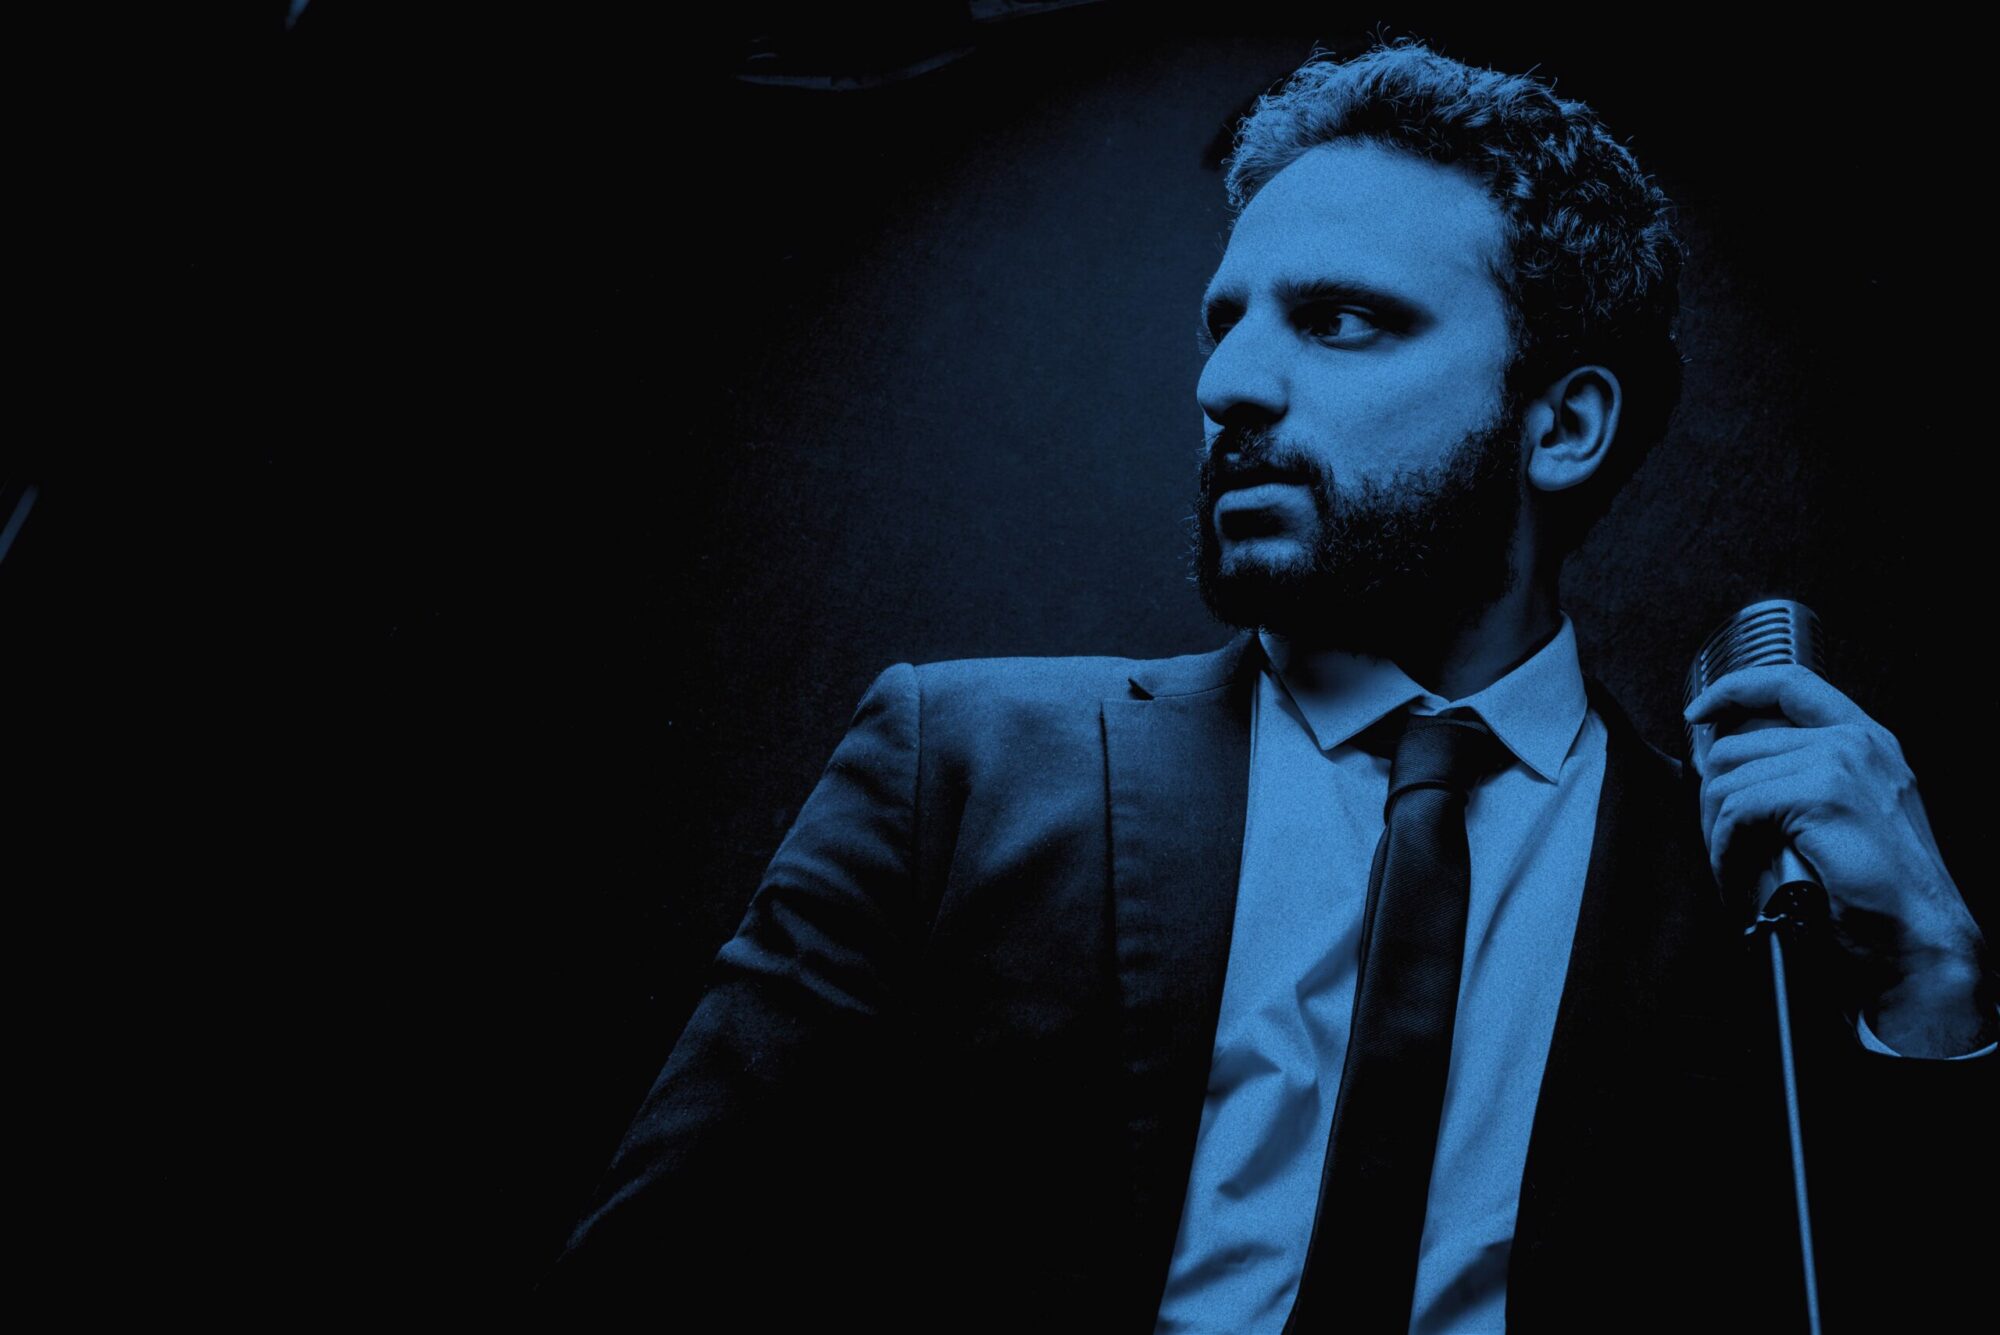 Image name Nish Kumar at Leadmill Sheffield scaled the 23 image from the post Nish Kumar: Nish, Don't Kill My Vibe at Scarborough Spa Theatre, Scarborough in Yorkshire.com.